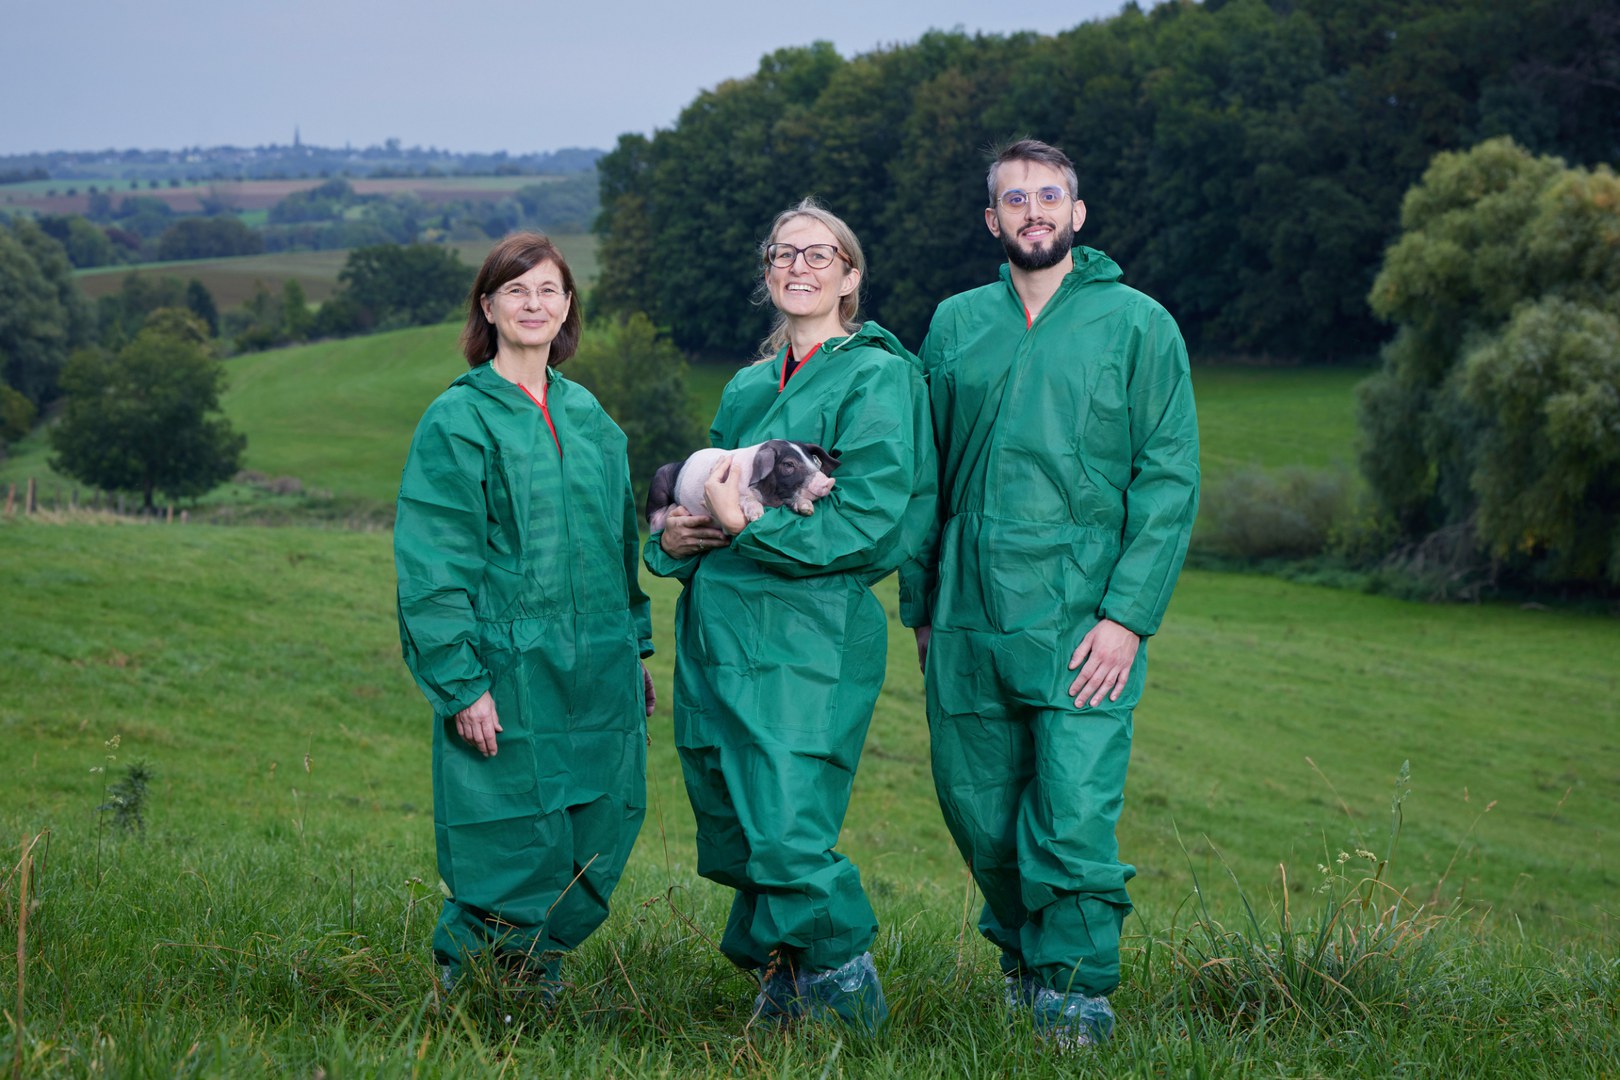 The team (left to right) in hygienic protective clothing with piglets: